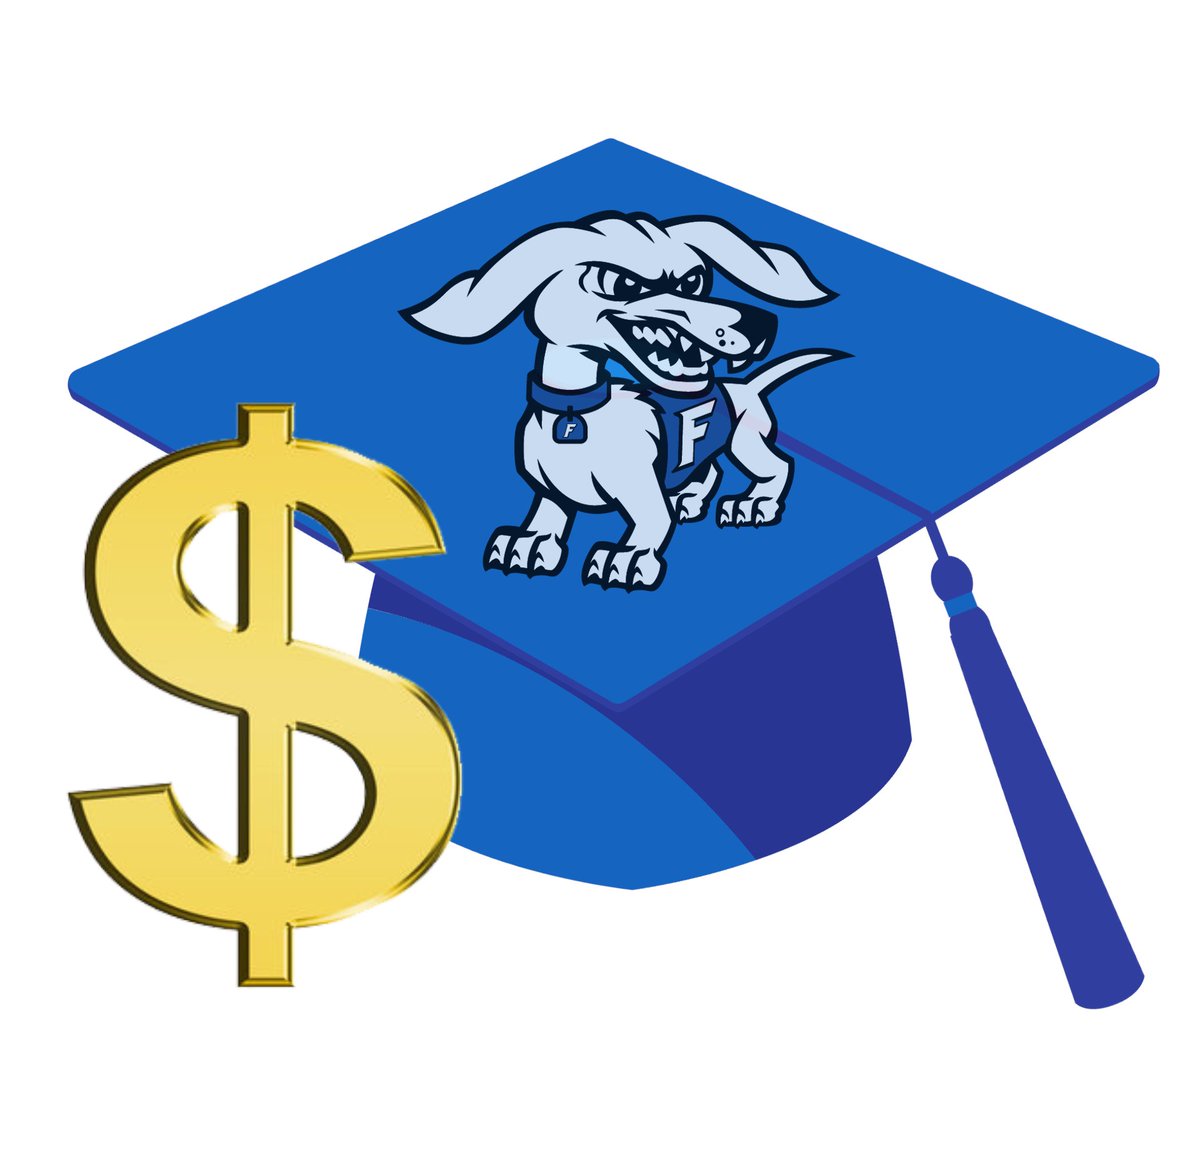 The Frankfort Scholarship Program applications are now available in the Student Services office! The deadline is February 24, 2023, so pick one up soon!